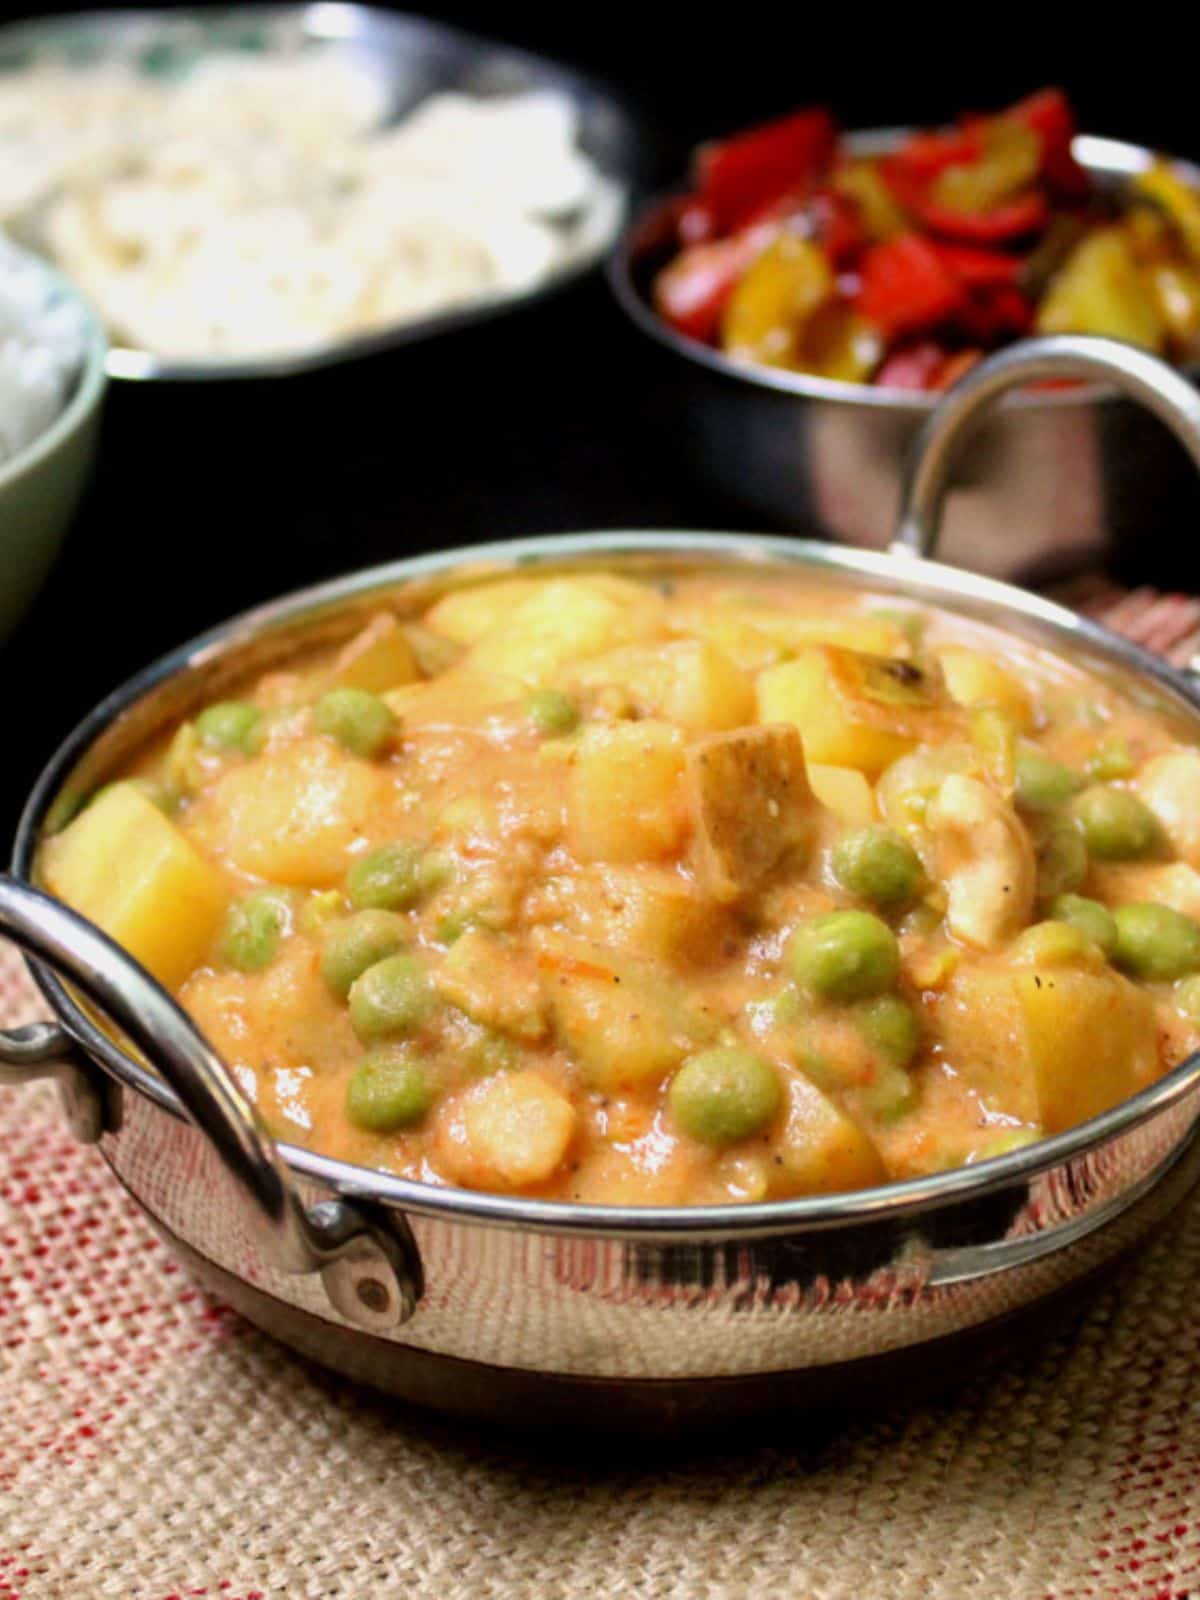 Peas potato curry with rice and a vegetable dish in background.